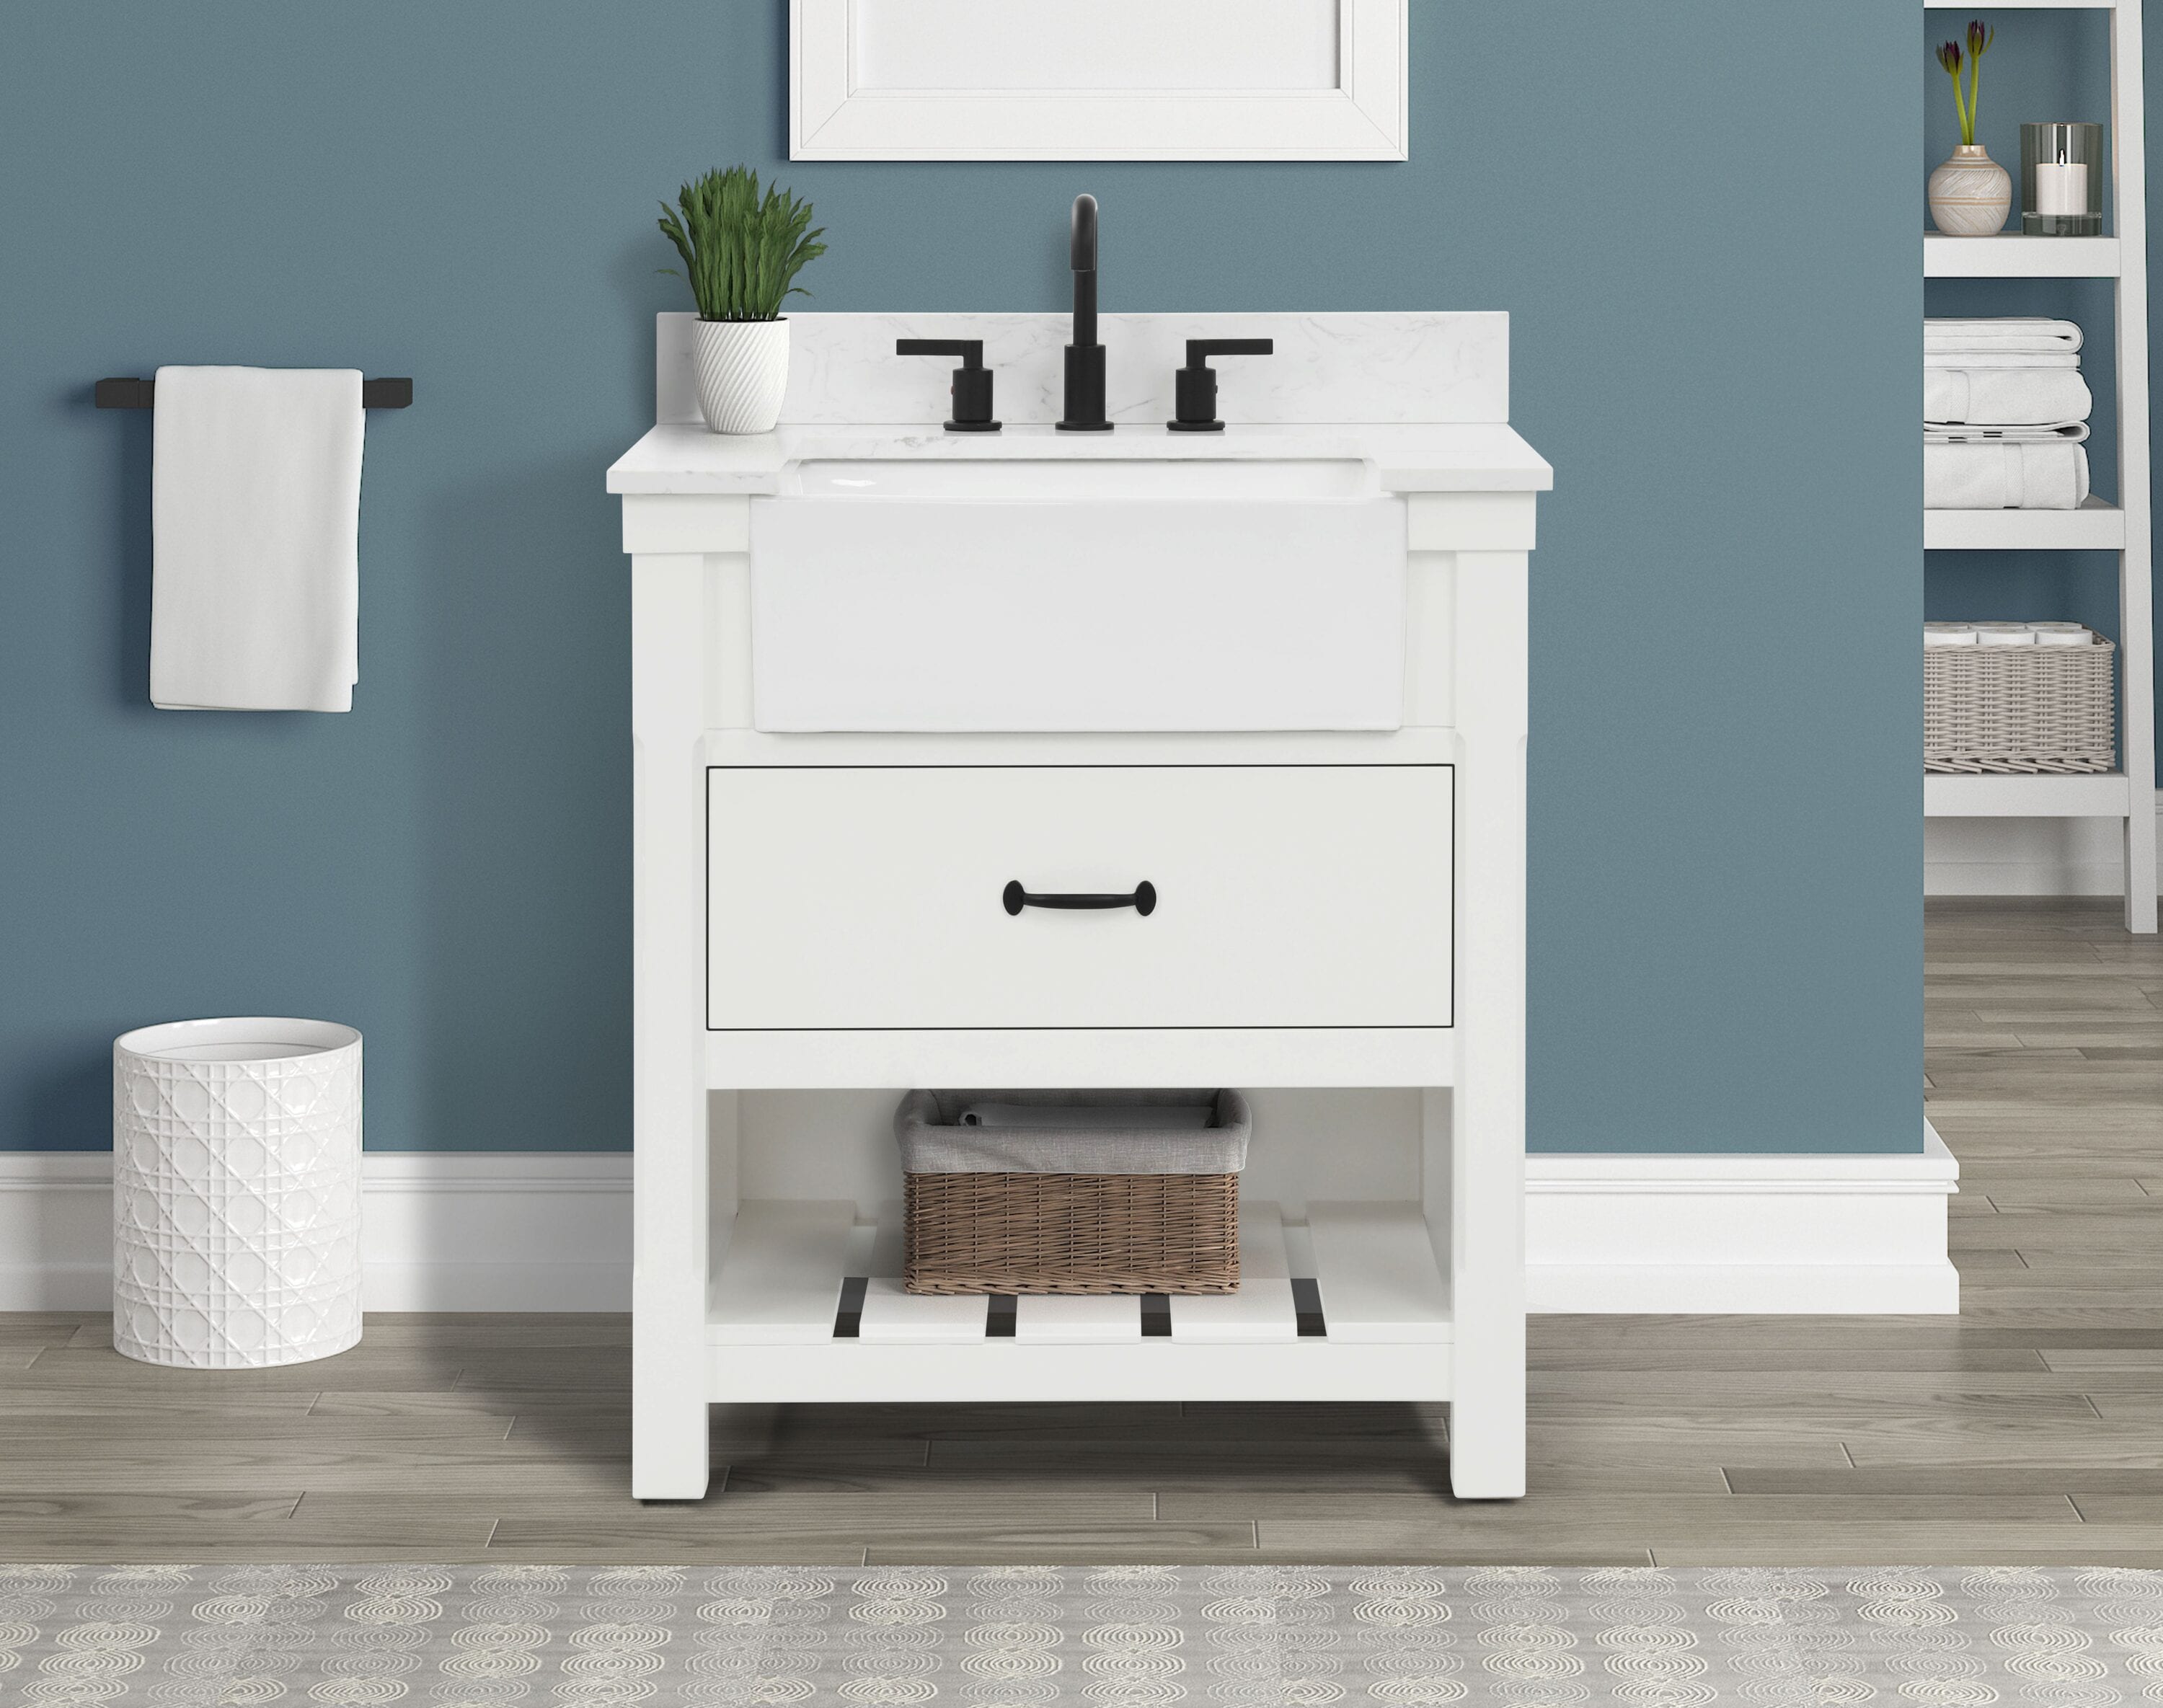 Project Source 30-in Gray Single Sink Bathroom Vanity with White Cultured Marble Top | R39 VBCU3018